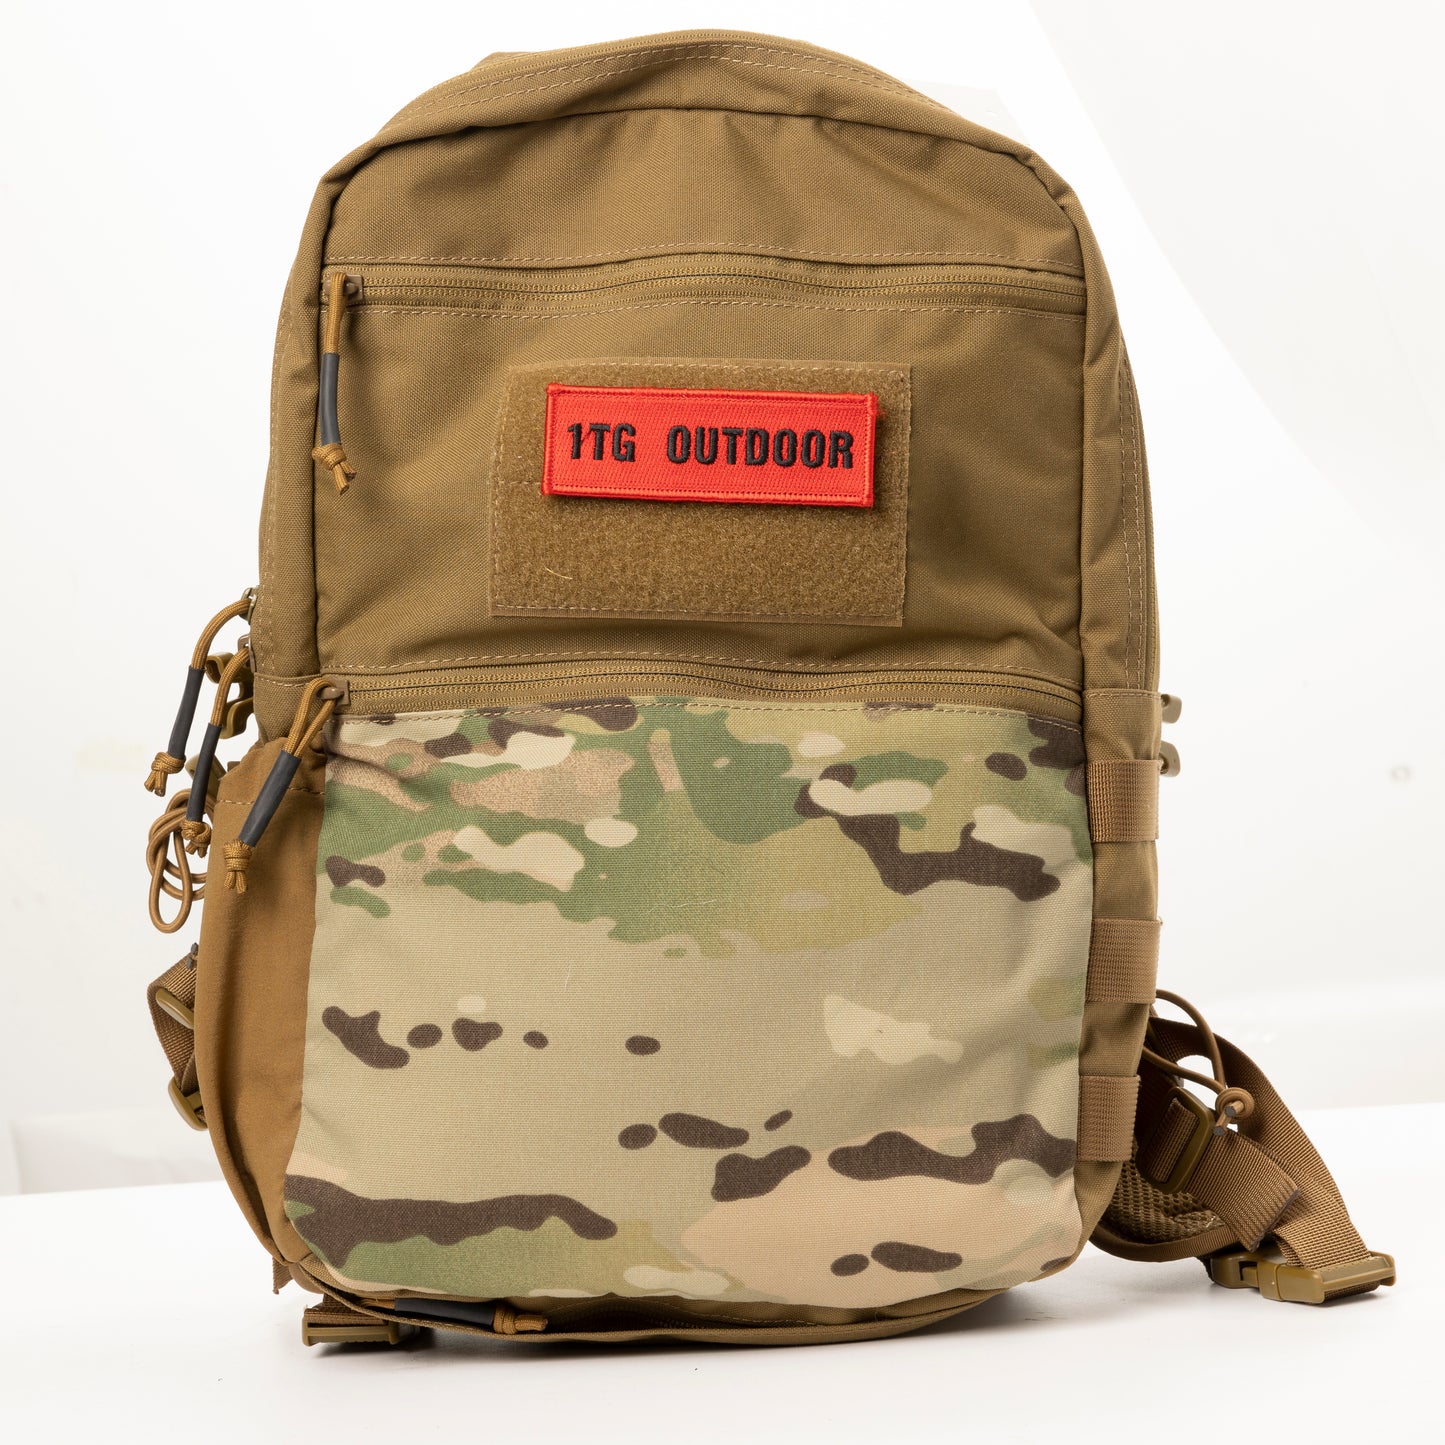 1TG OUTDOOR Backpack